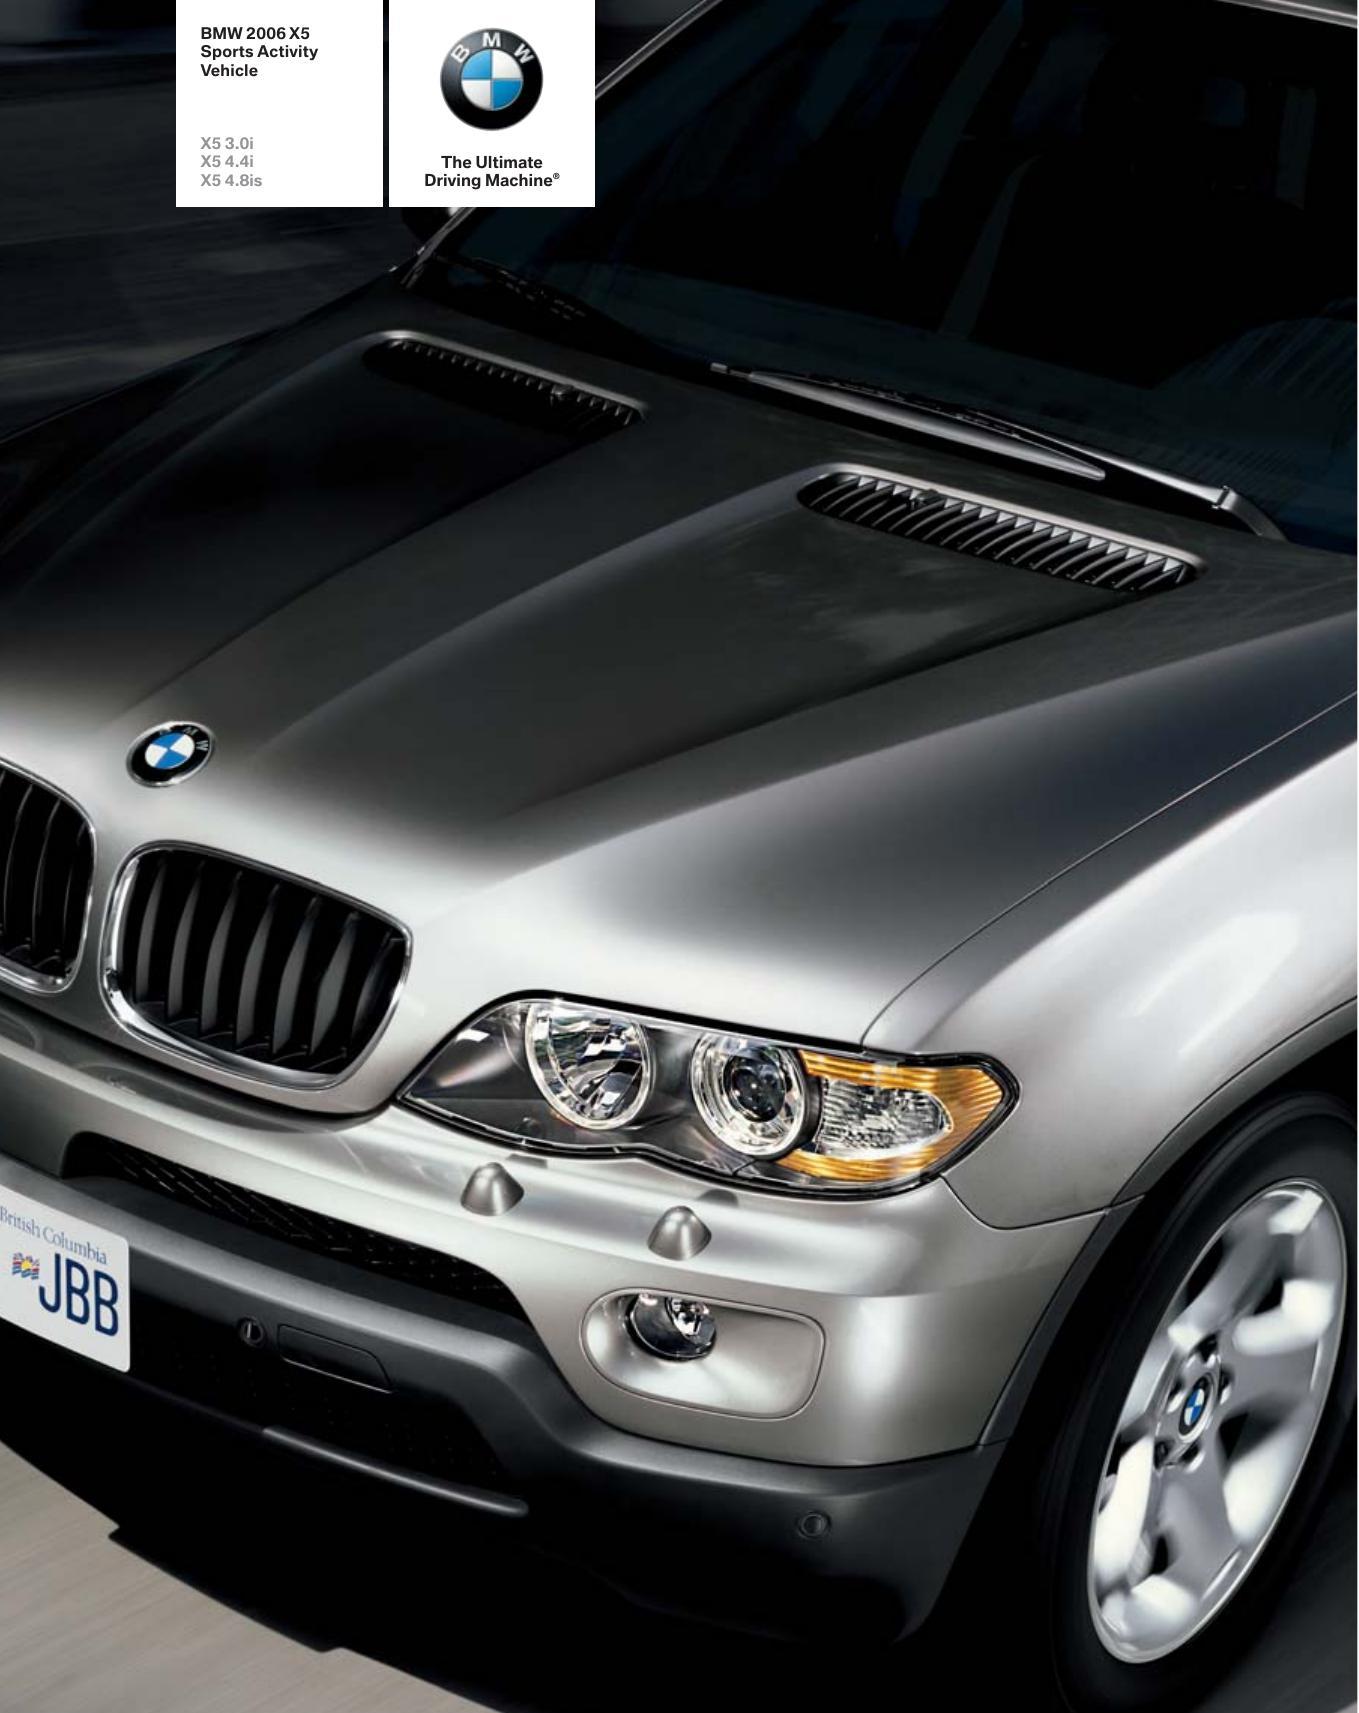 2006-bmw-x5-sports-activity-vehicle-owners-manual.pdf